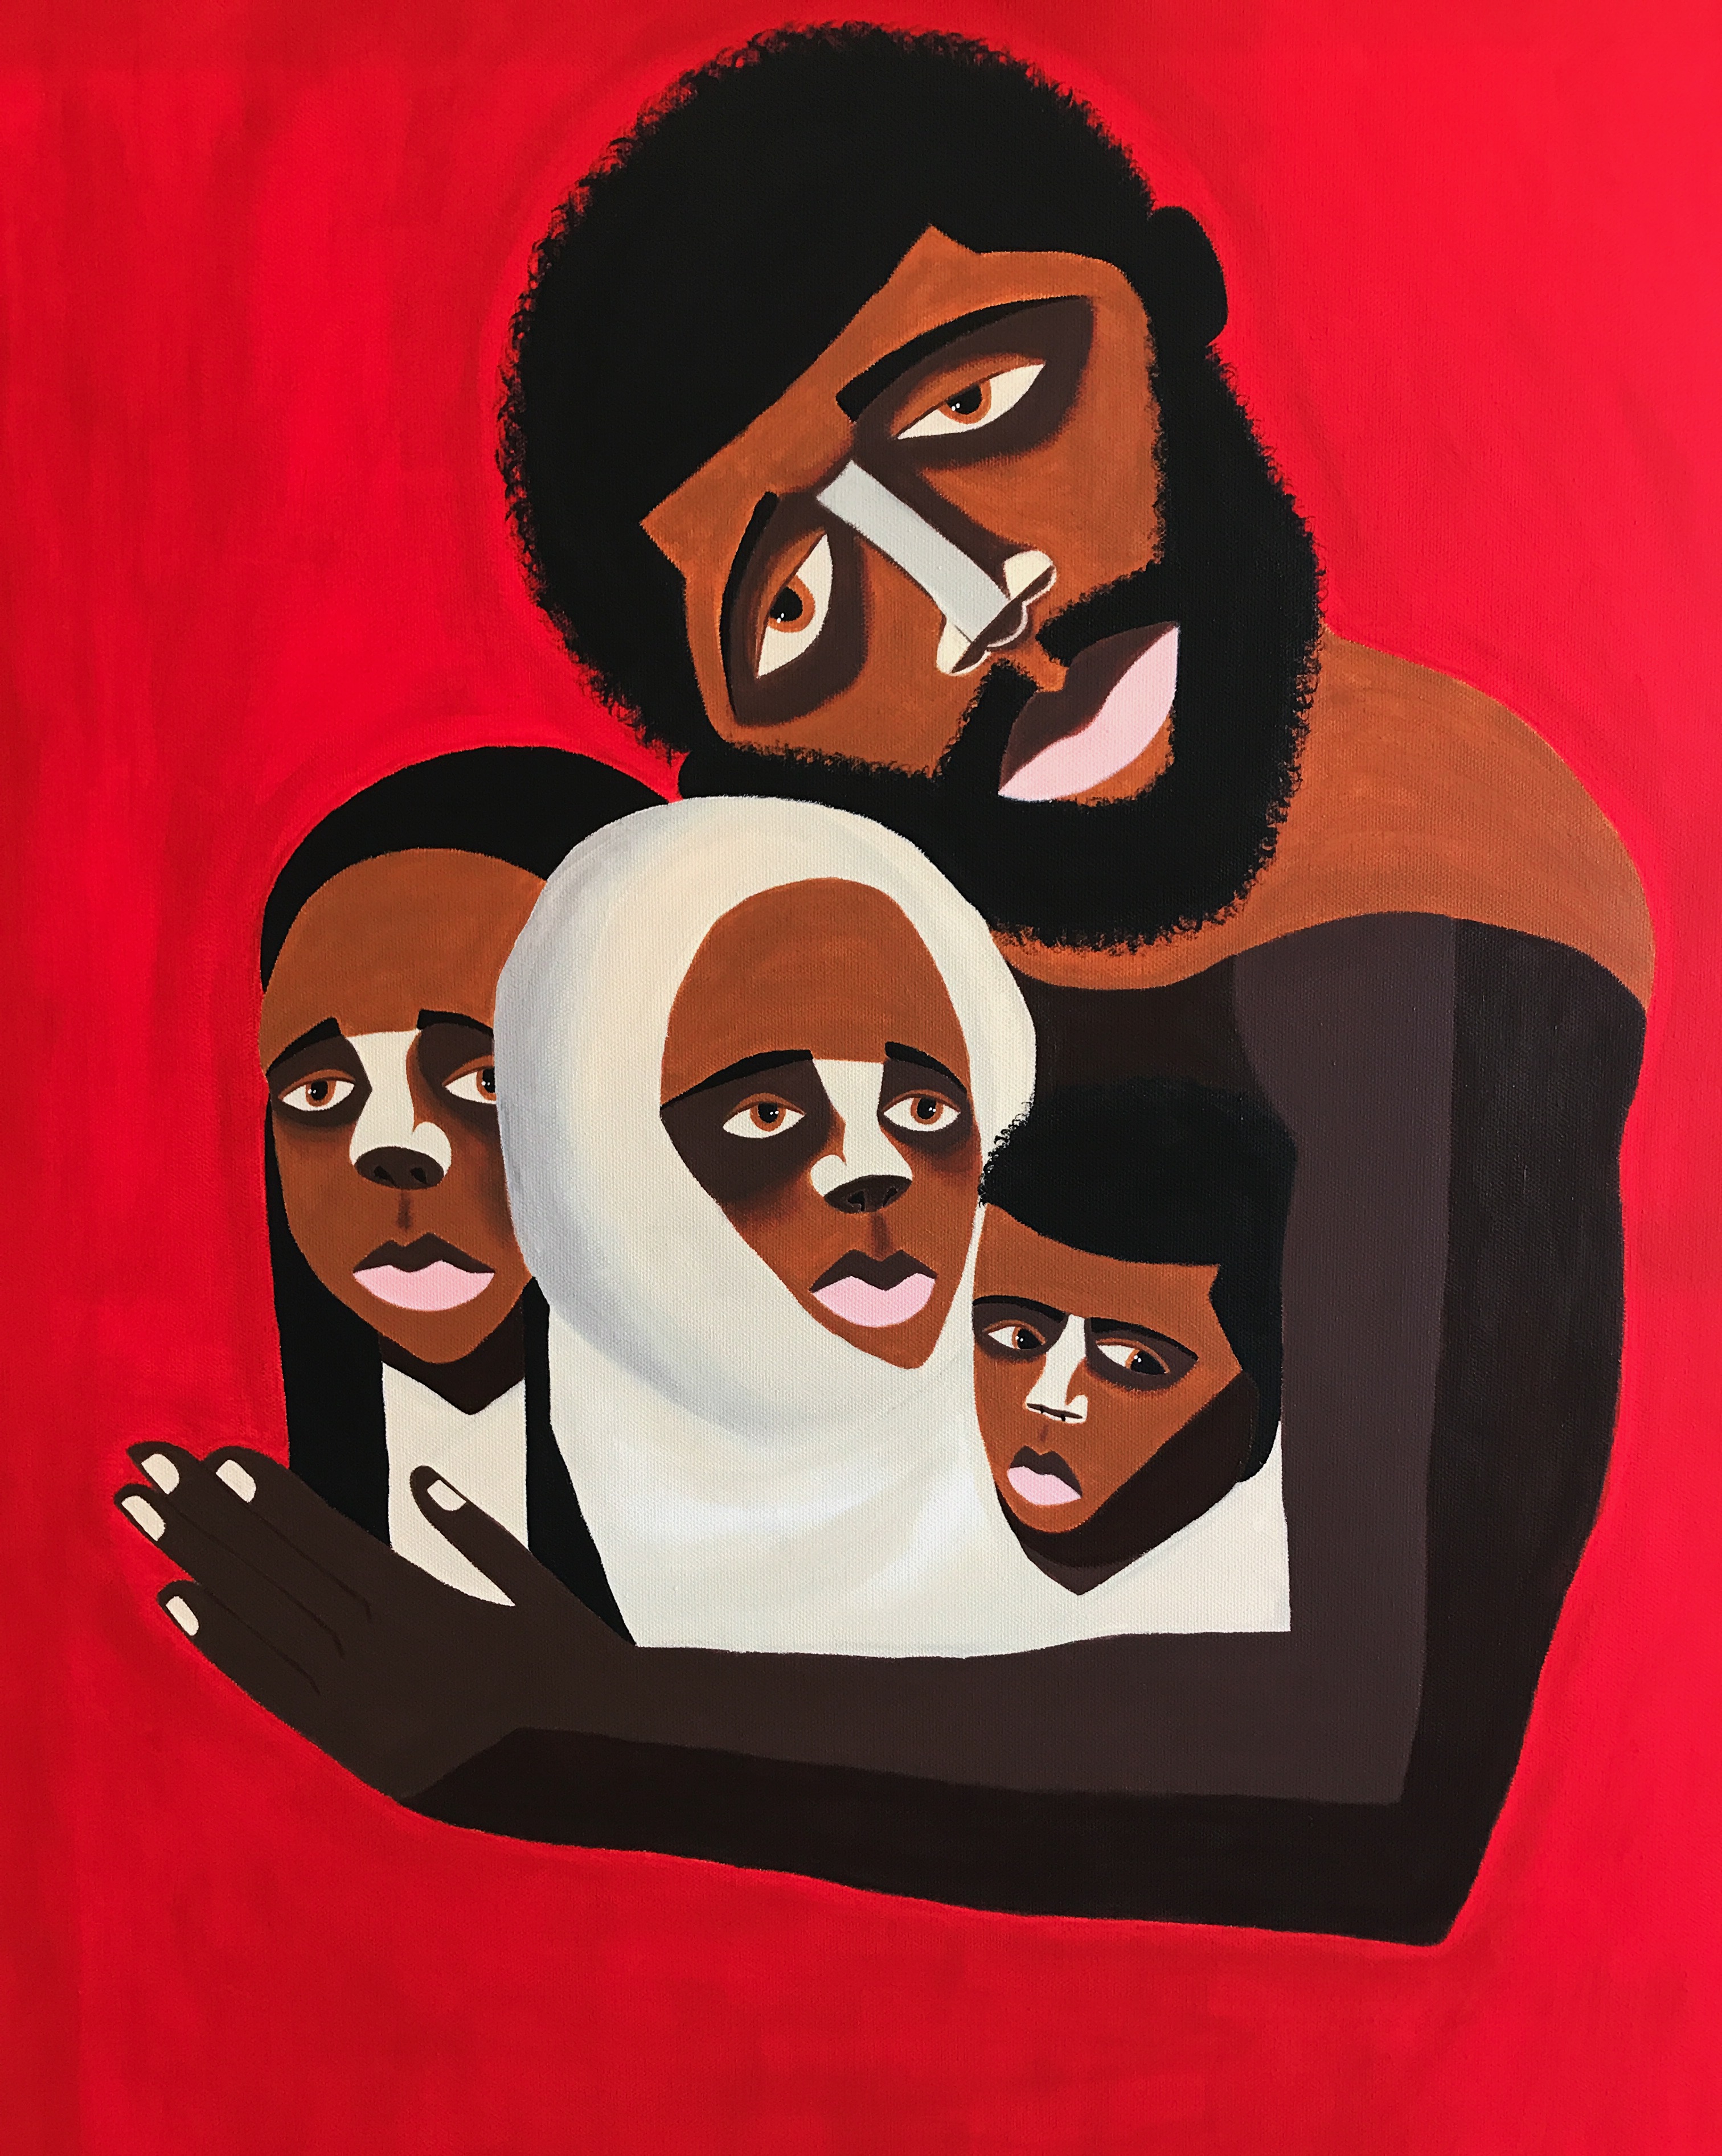 "Black Family: The Myth of the Missing Black Father," 2019, by Antwoine Washington, will be part of the upcoming "New Histories, New Futures'' show at the Transformer Station gallery in Ohio City.